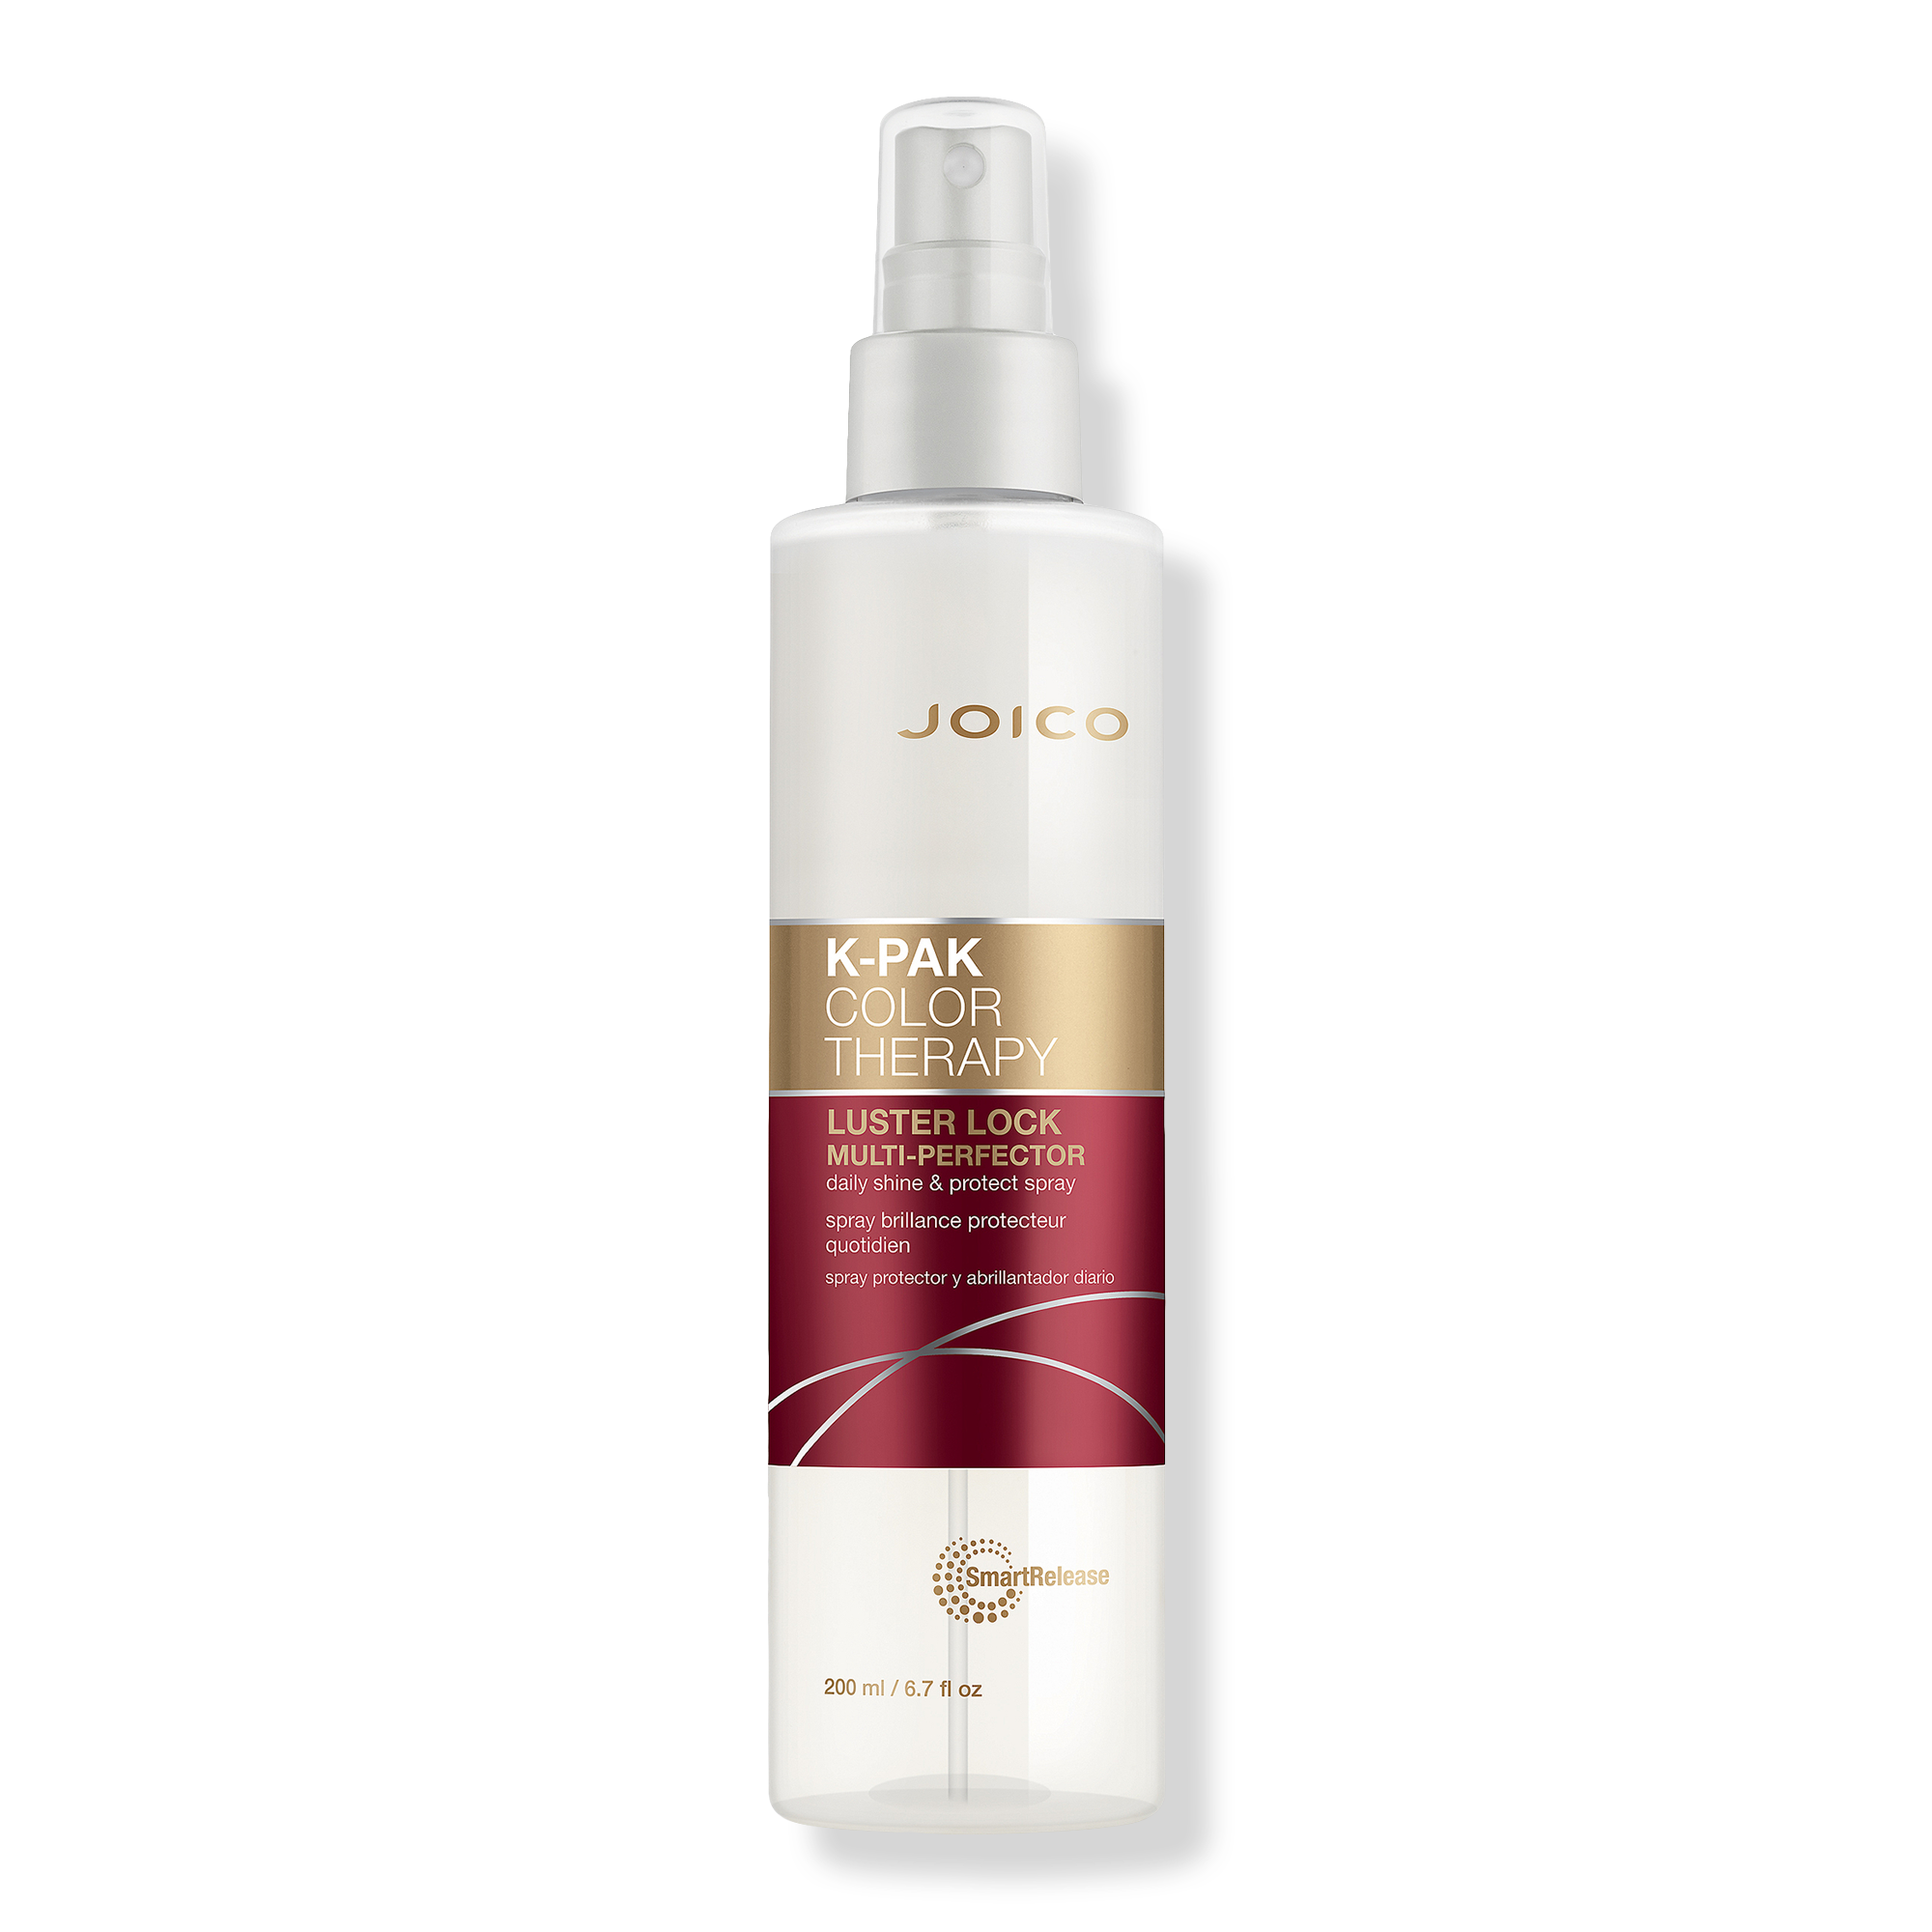 Joico K-PAK Color Therapy Luster Lock Multi-Perfector Daily Shine & Protect Spray / 6.OZ